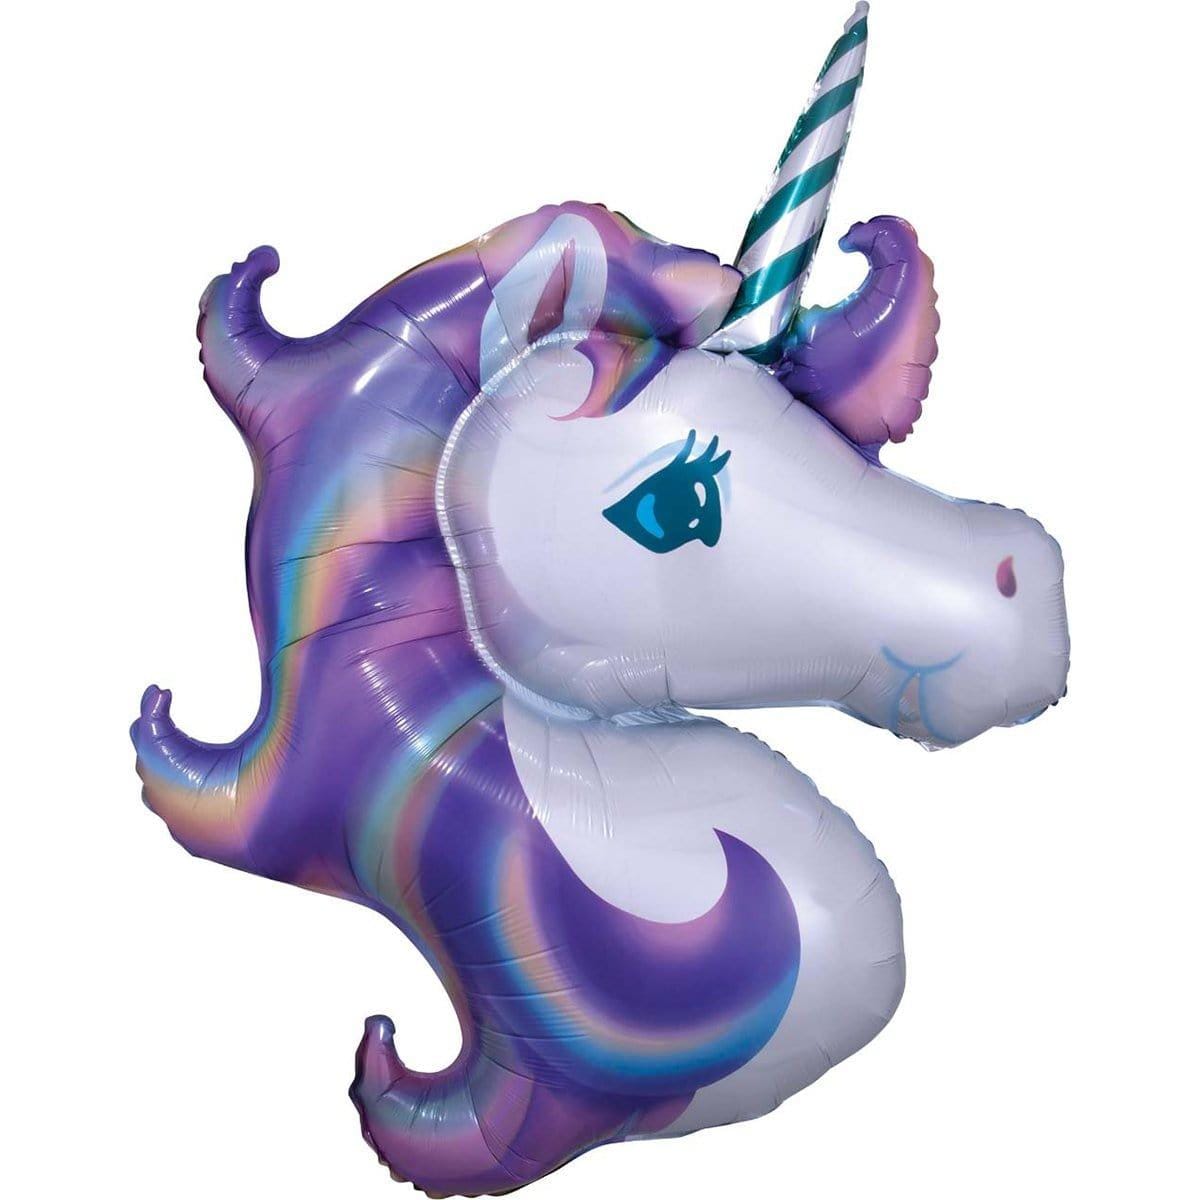 Buy Balloons Unicorn Supershape Balloon sold at Party Expert